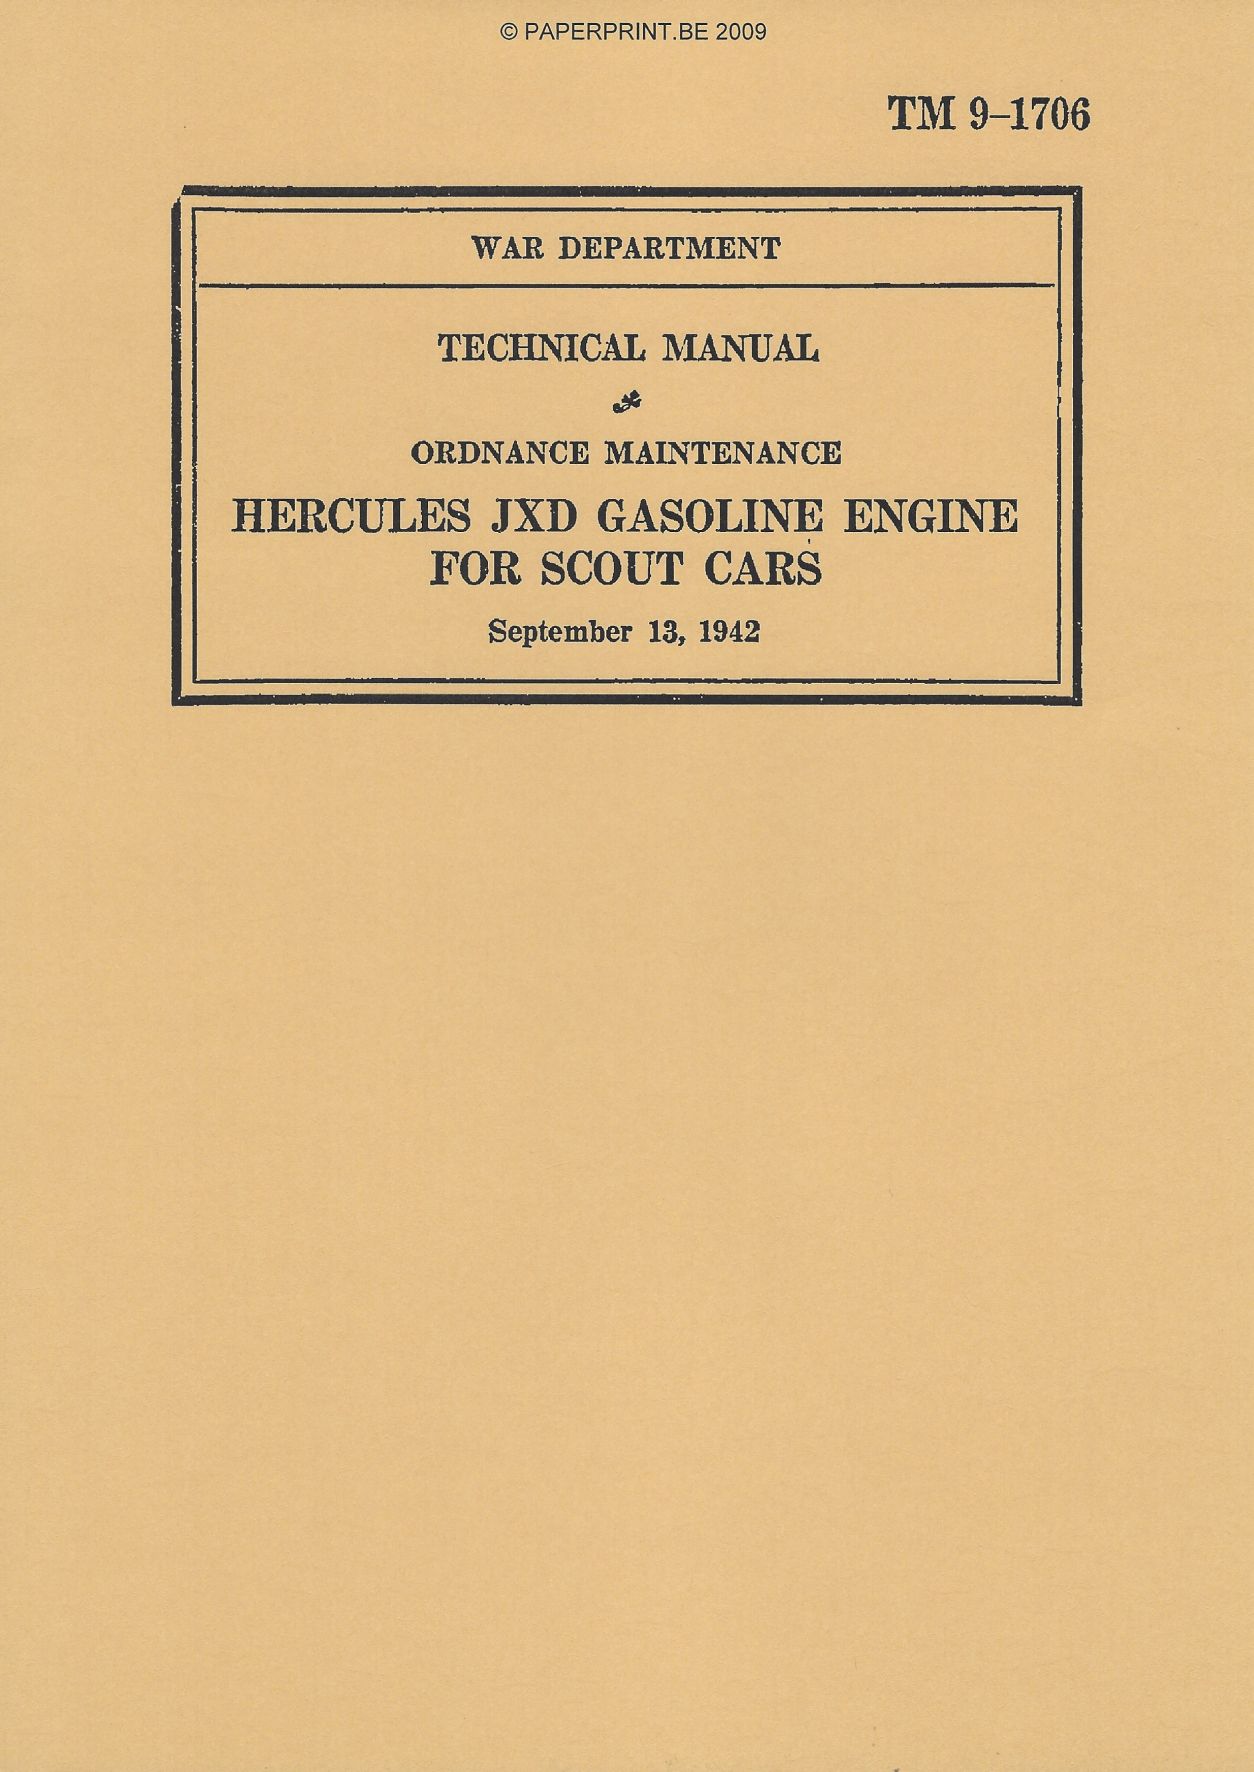 TM 9-1706 US HERCULES JXD GASOLINE ENGINE FOR SCOUT CARS